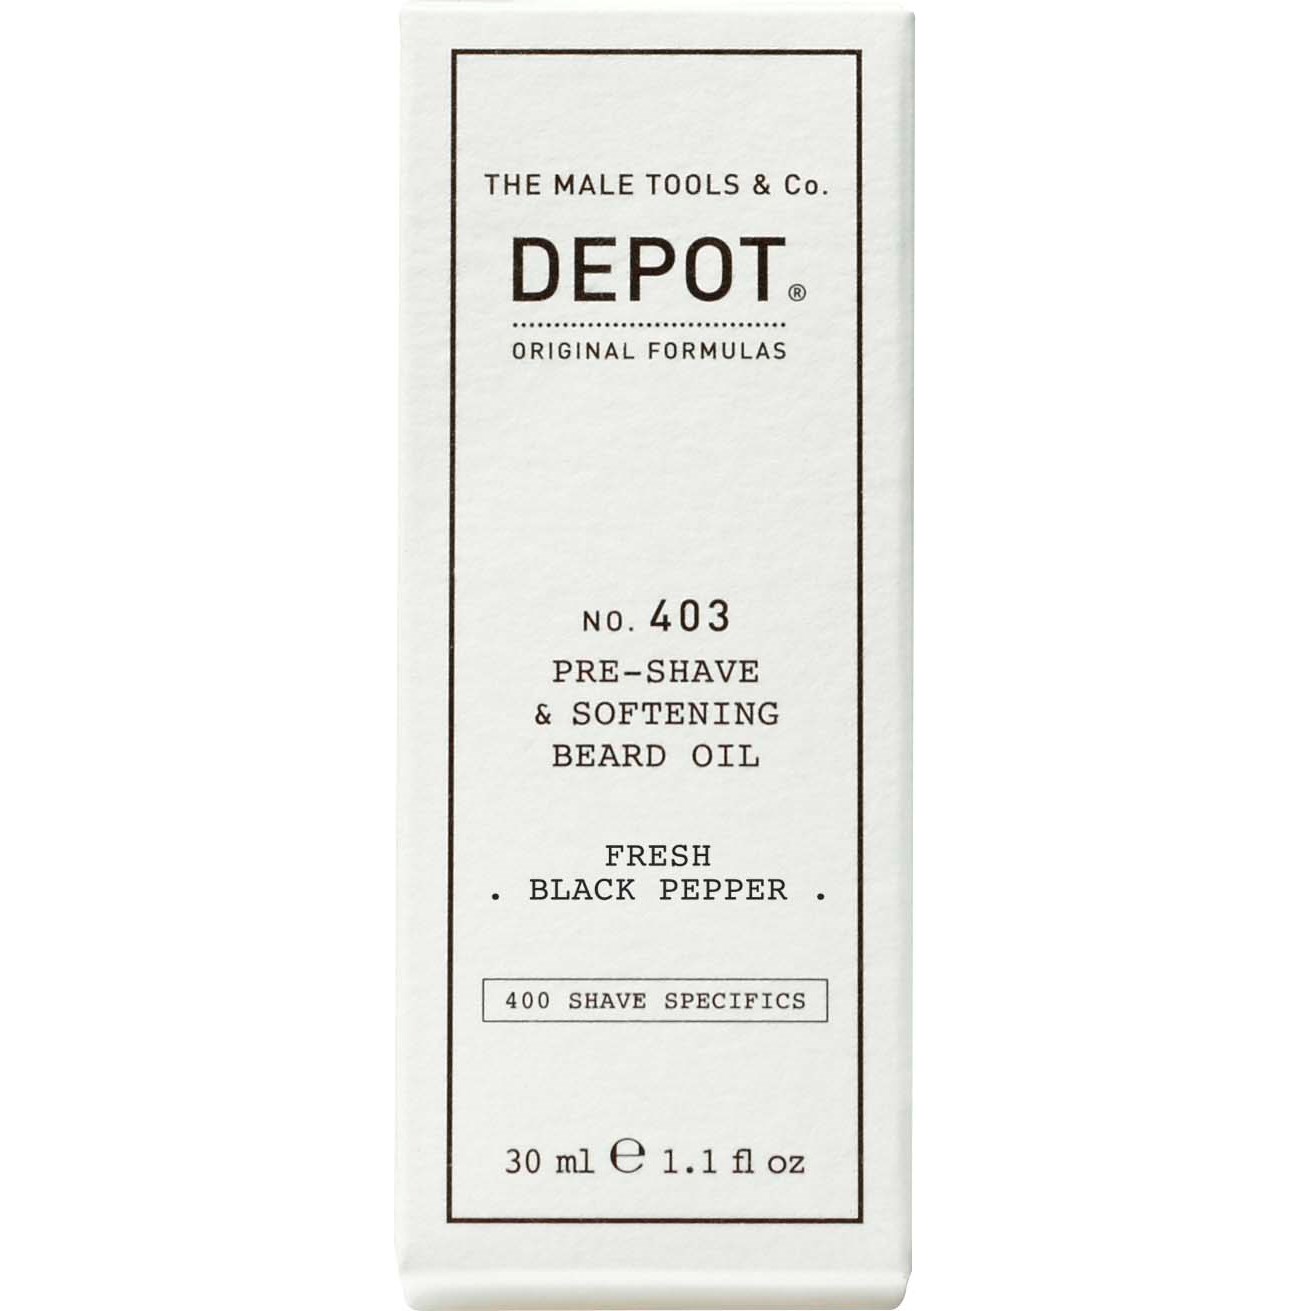 DEPOT MALE TOOLS No. 403 Pre-Shave & Soft. Beard Oil Fresh Black Peppe